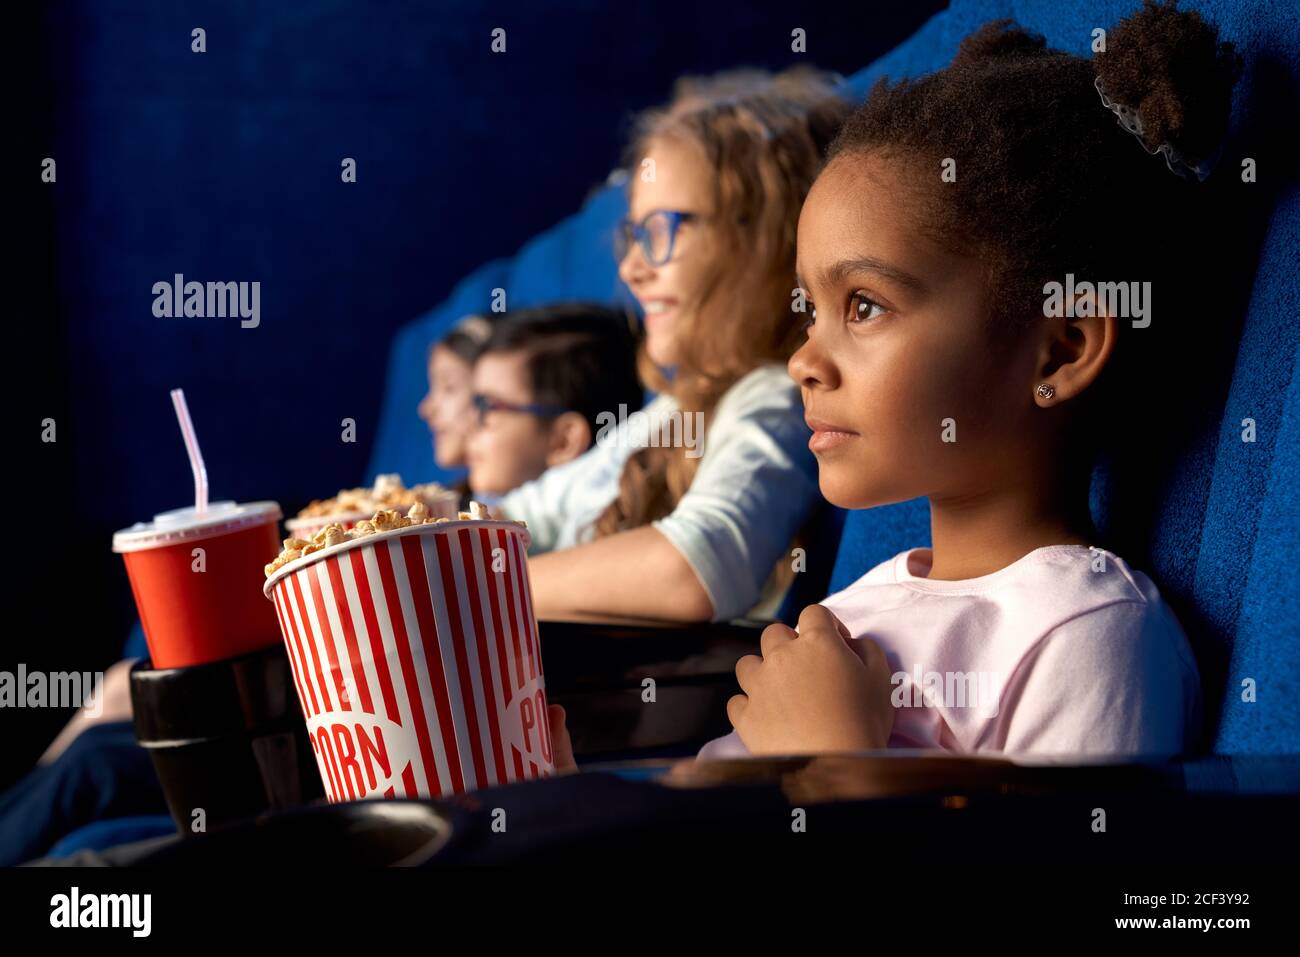 Beautiful concentrated african girl with funny hairstyle watching movie in cinema. Adorable little female kid sitting with friends, eating popcorn and smiling. Concept of entertainment, leisure. Stock Photo